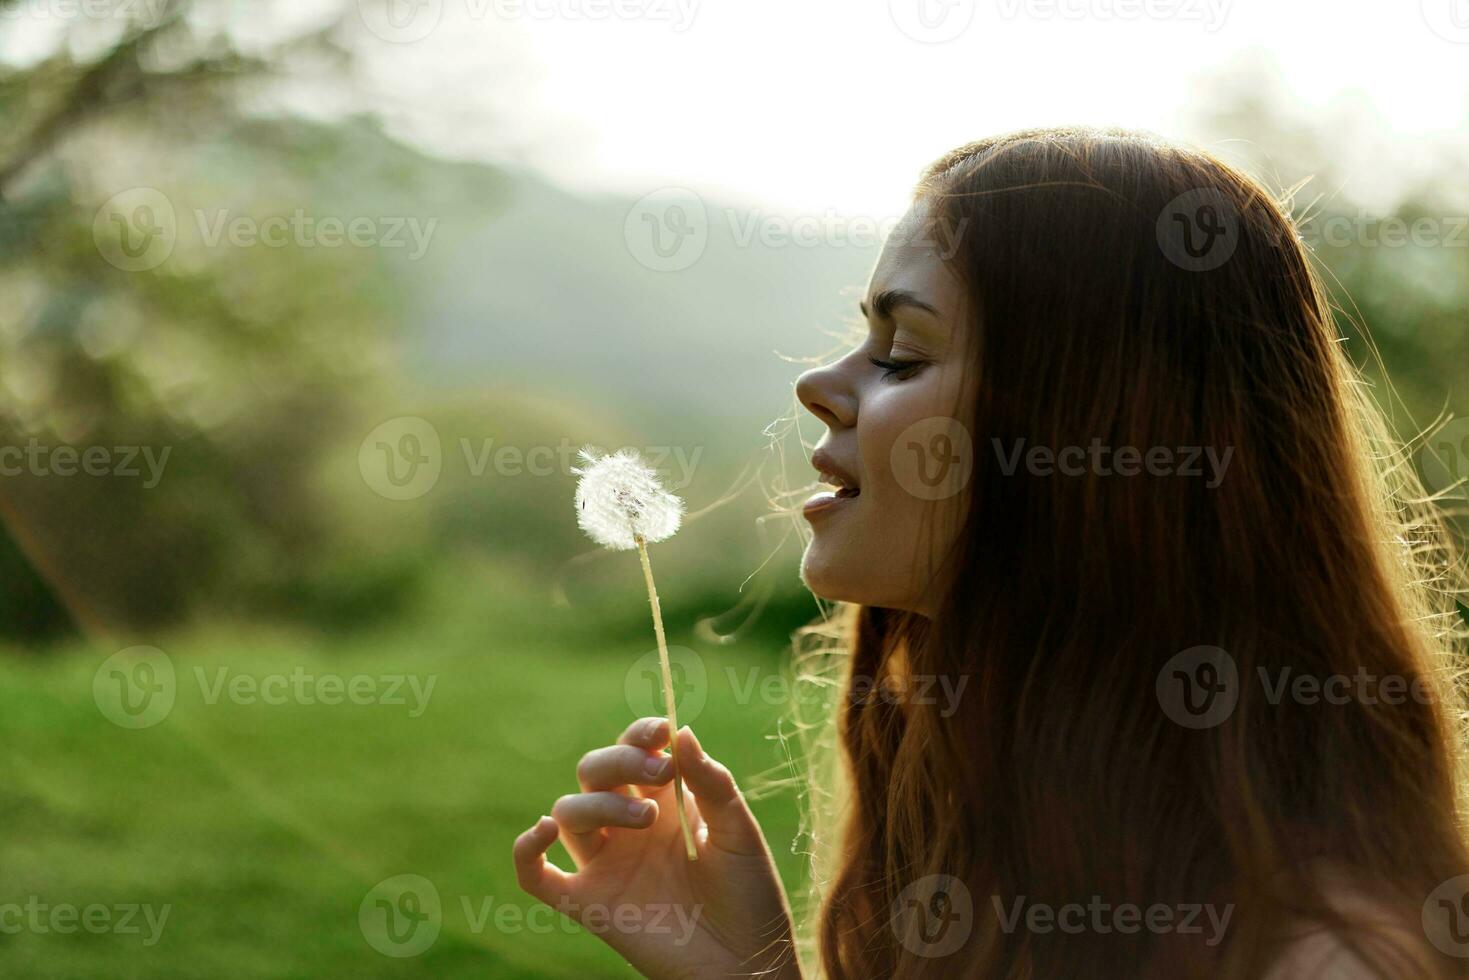 Portrait of a young woman with a dandelion flower in her hand blowing on it and smiling against the green summer grass in the rays of the setting sun in nature photo